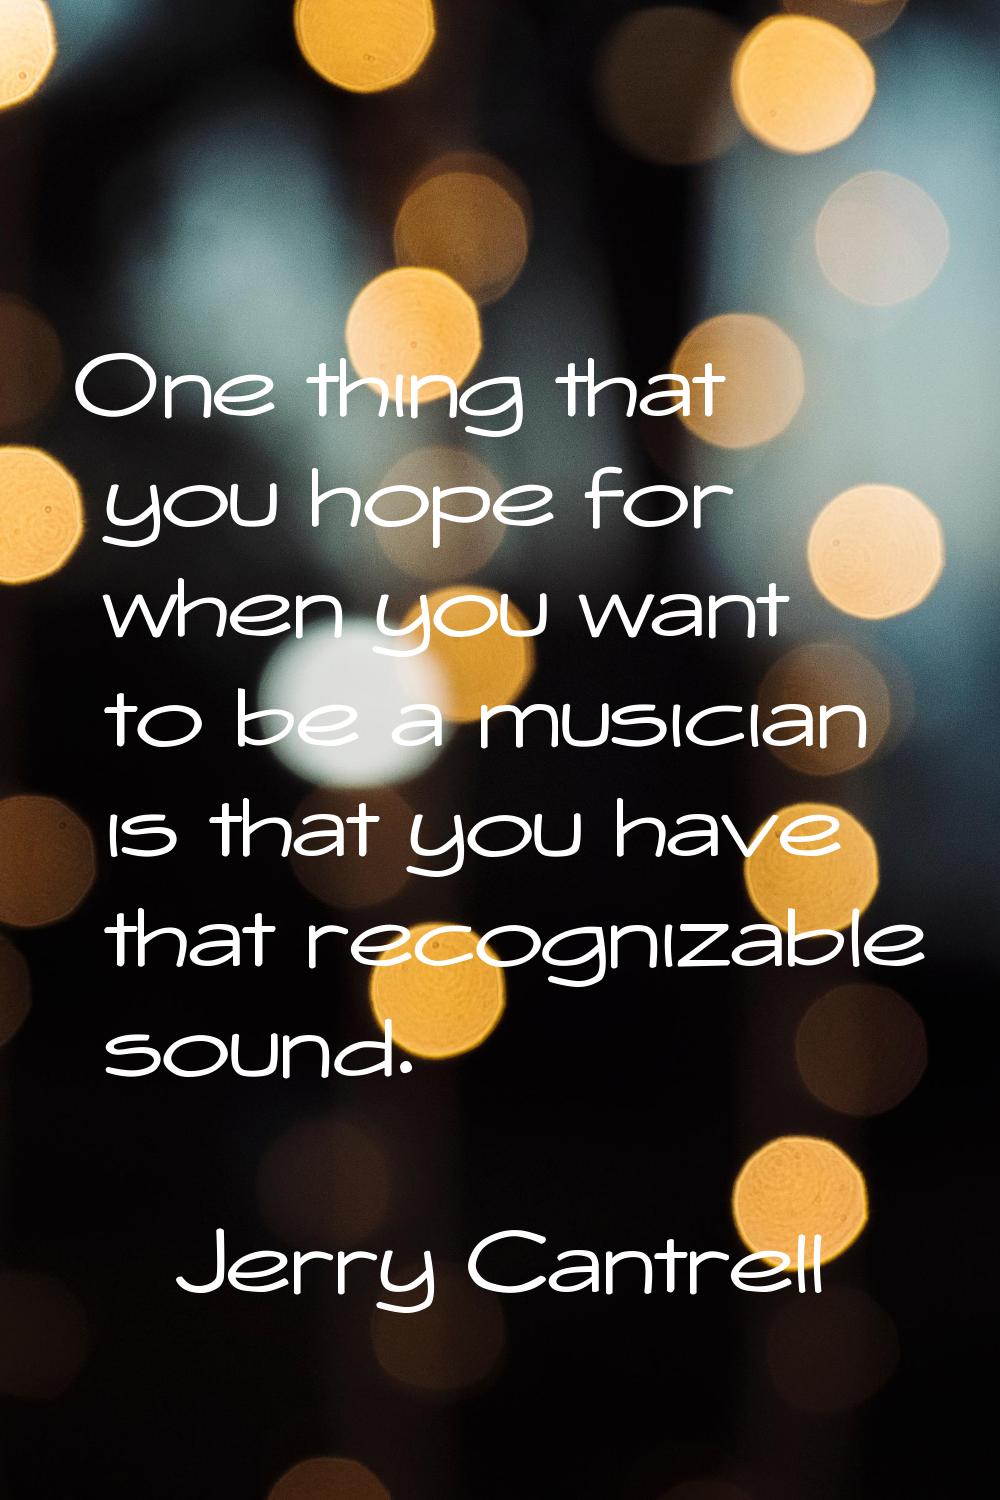 One thing that you hope for when you want to be a musician is that you have that recognizable sound